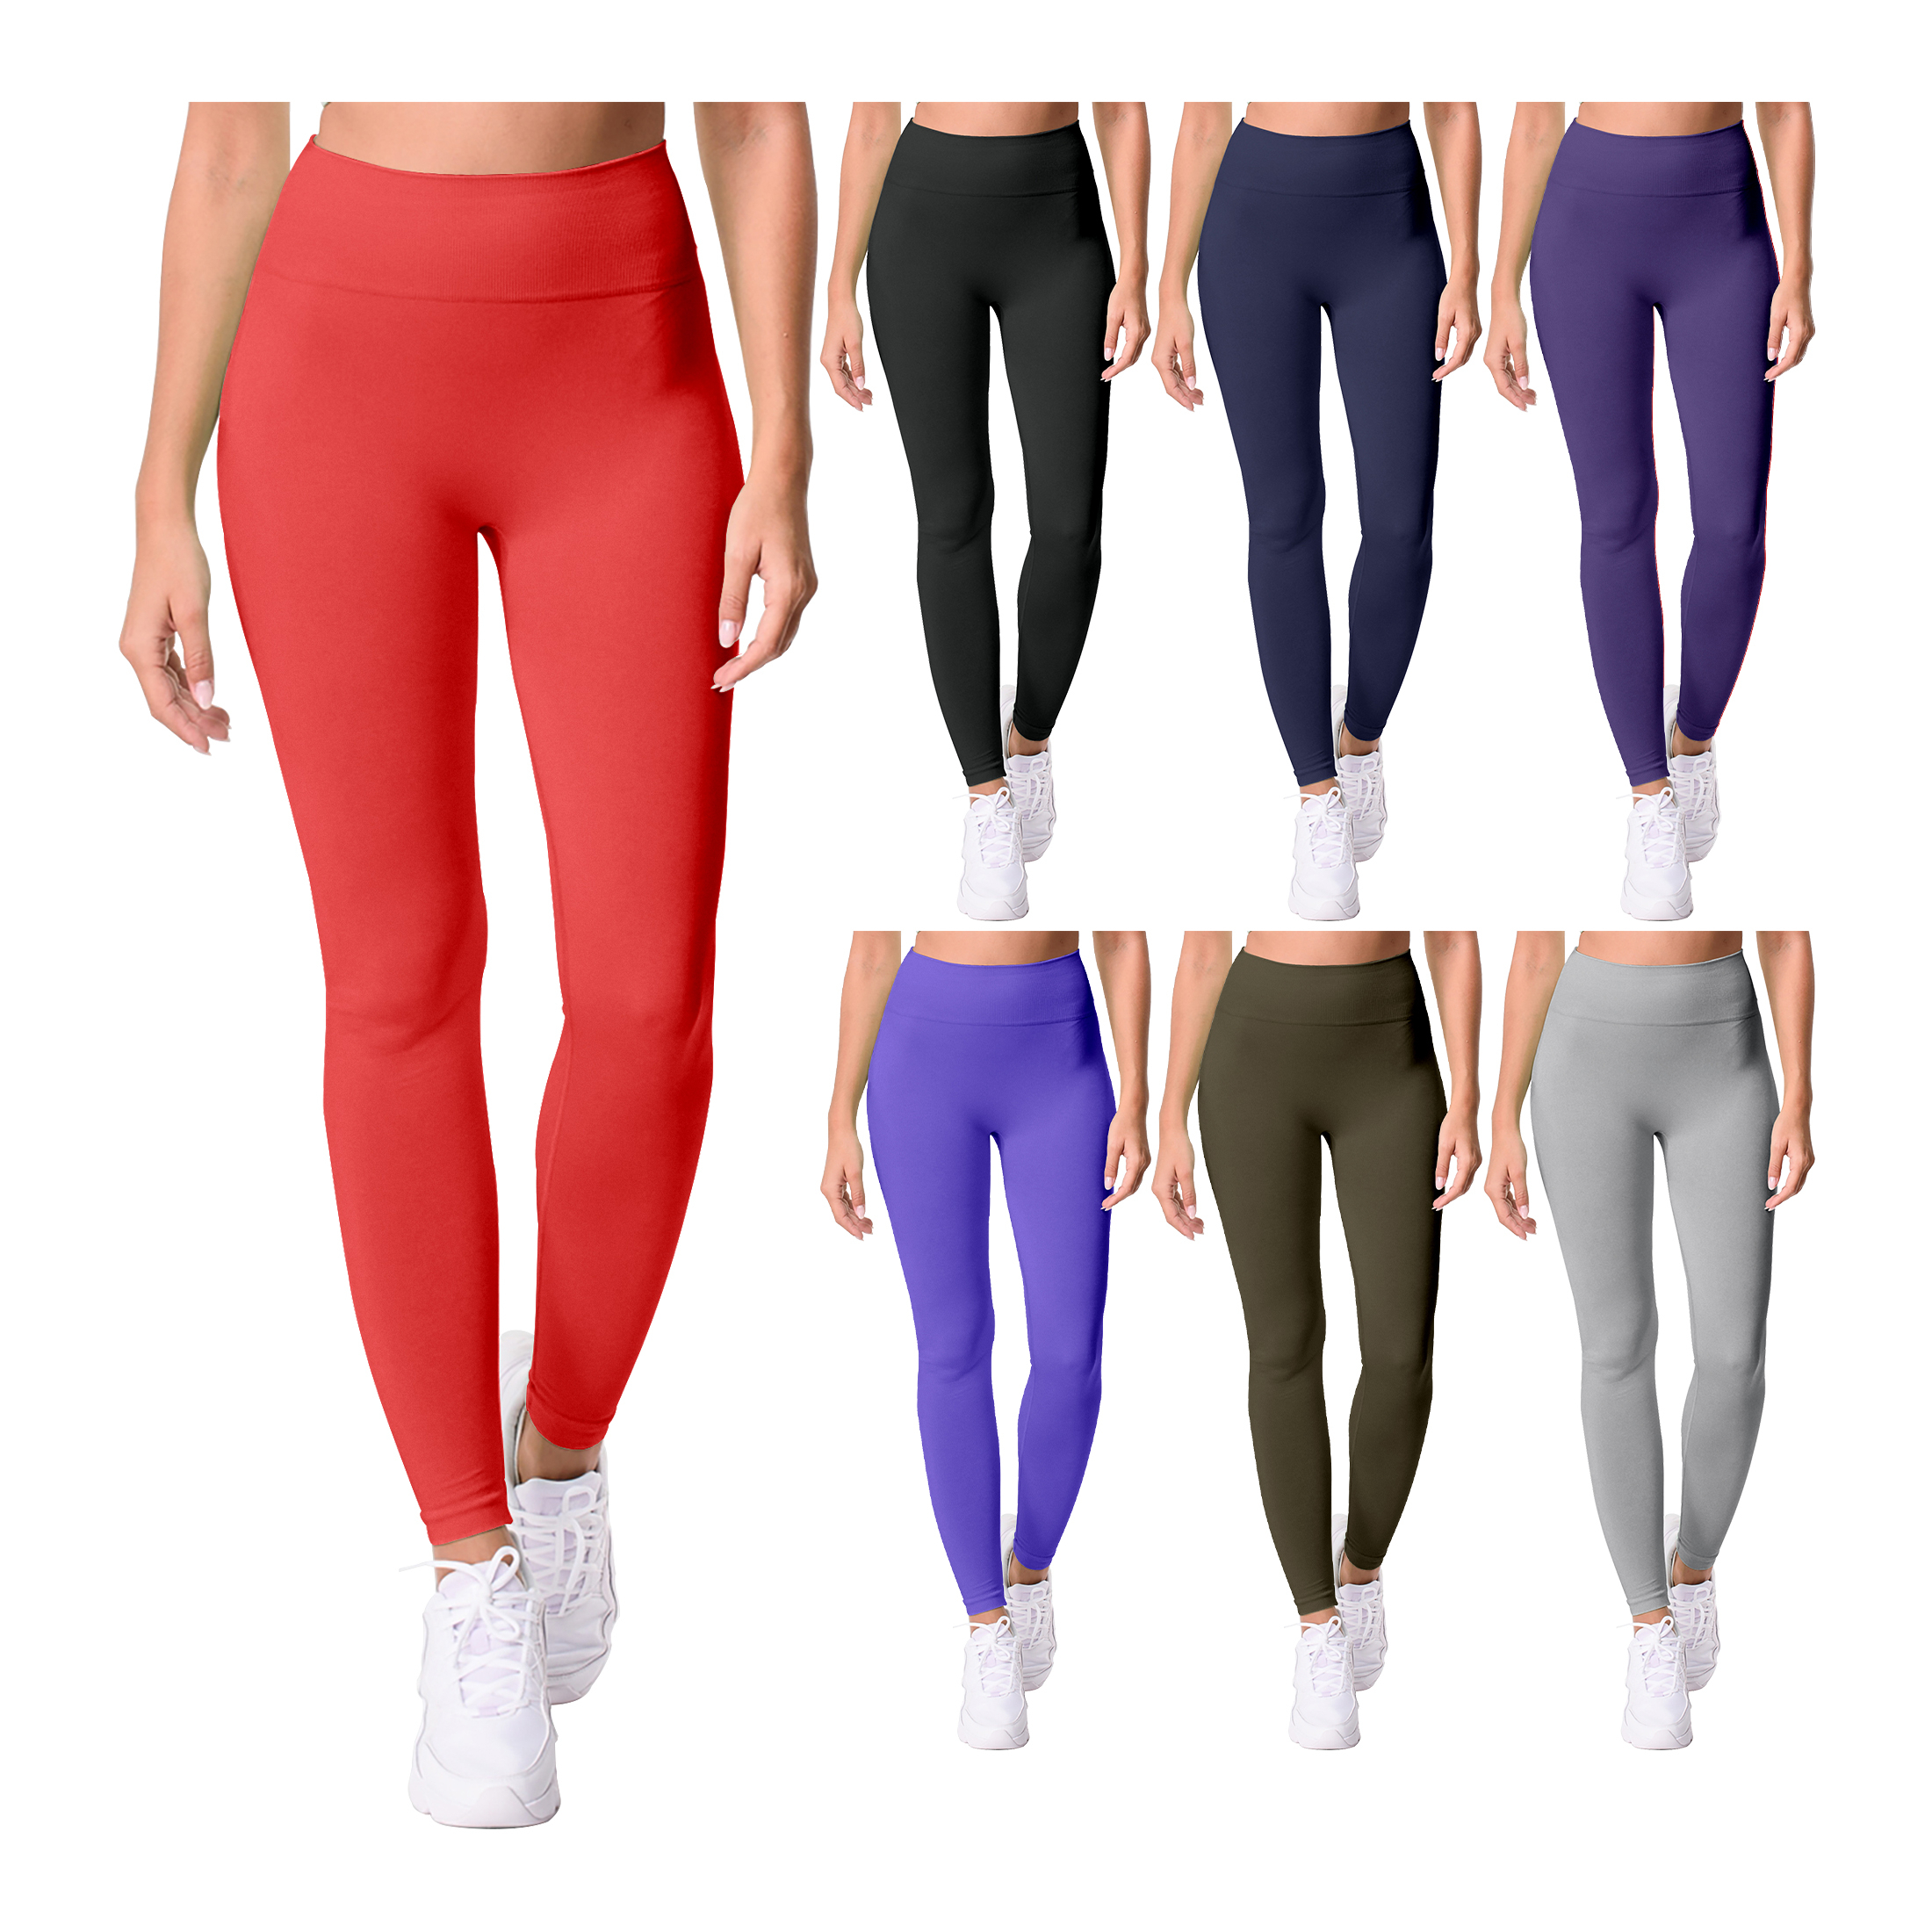 6-Pack: Women's Cozy Fleece-Lined Workout Yoga Pants Seamless Leggings - Assorted, Large